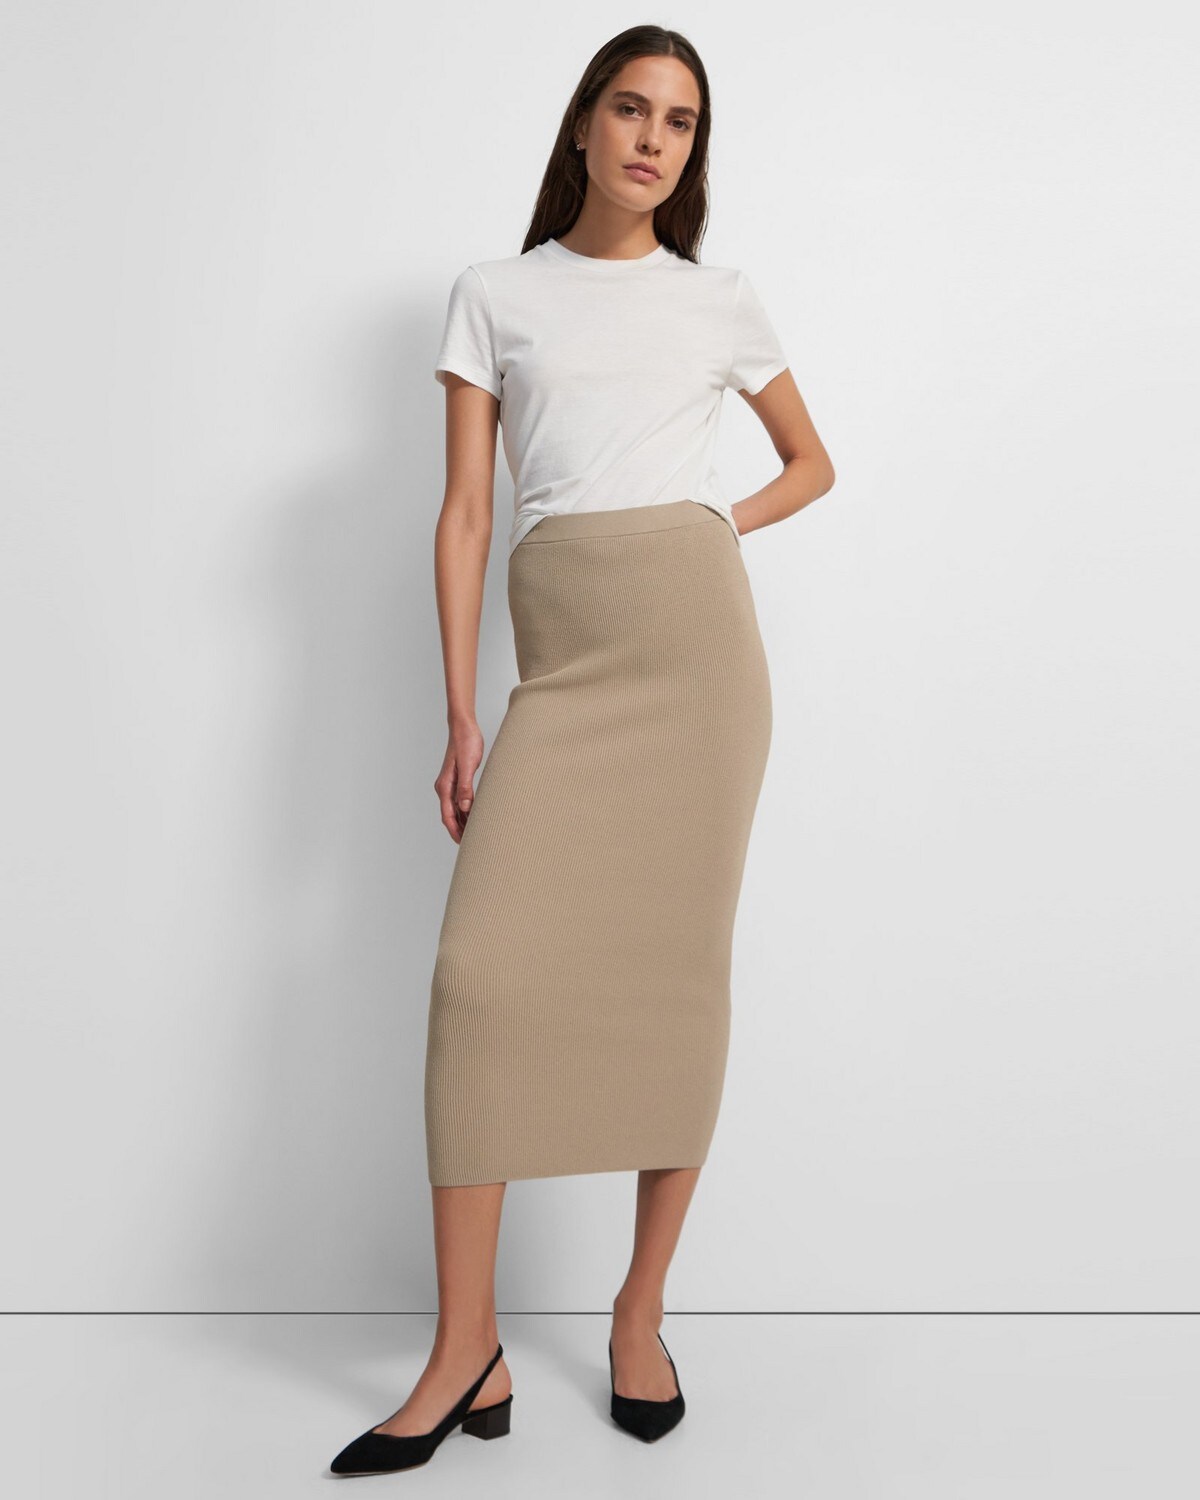 Ribbed Pencil Skirt in Crepe Knit